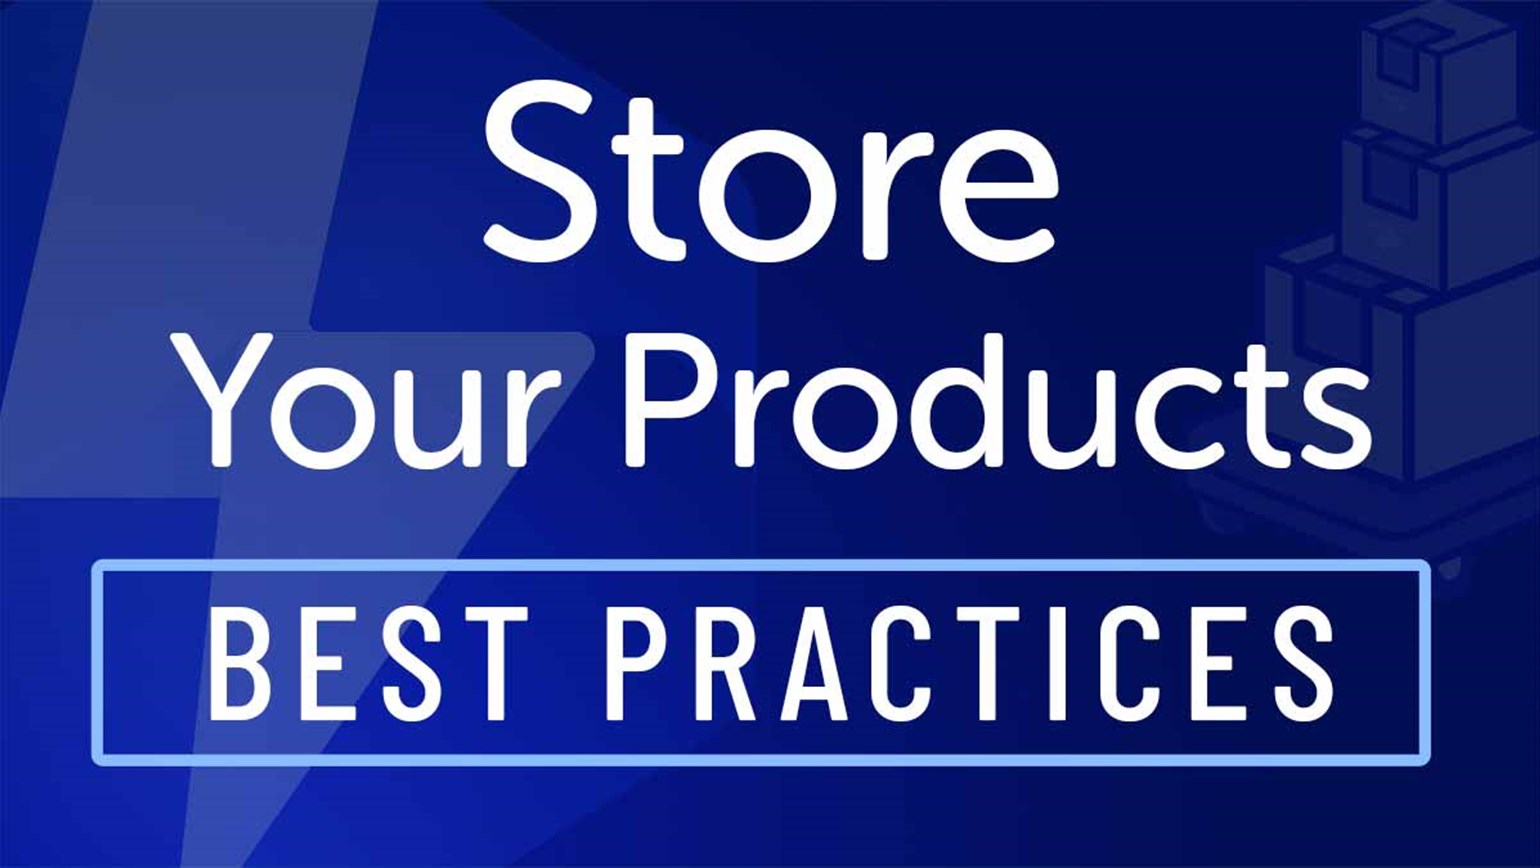 Store Your Products: Best Practices